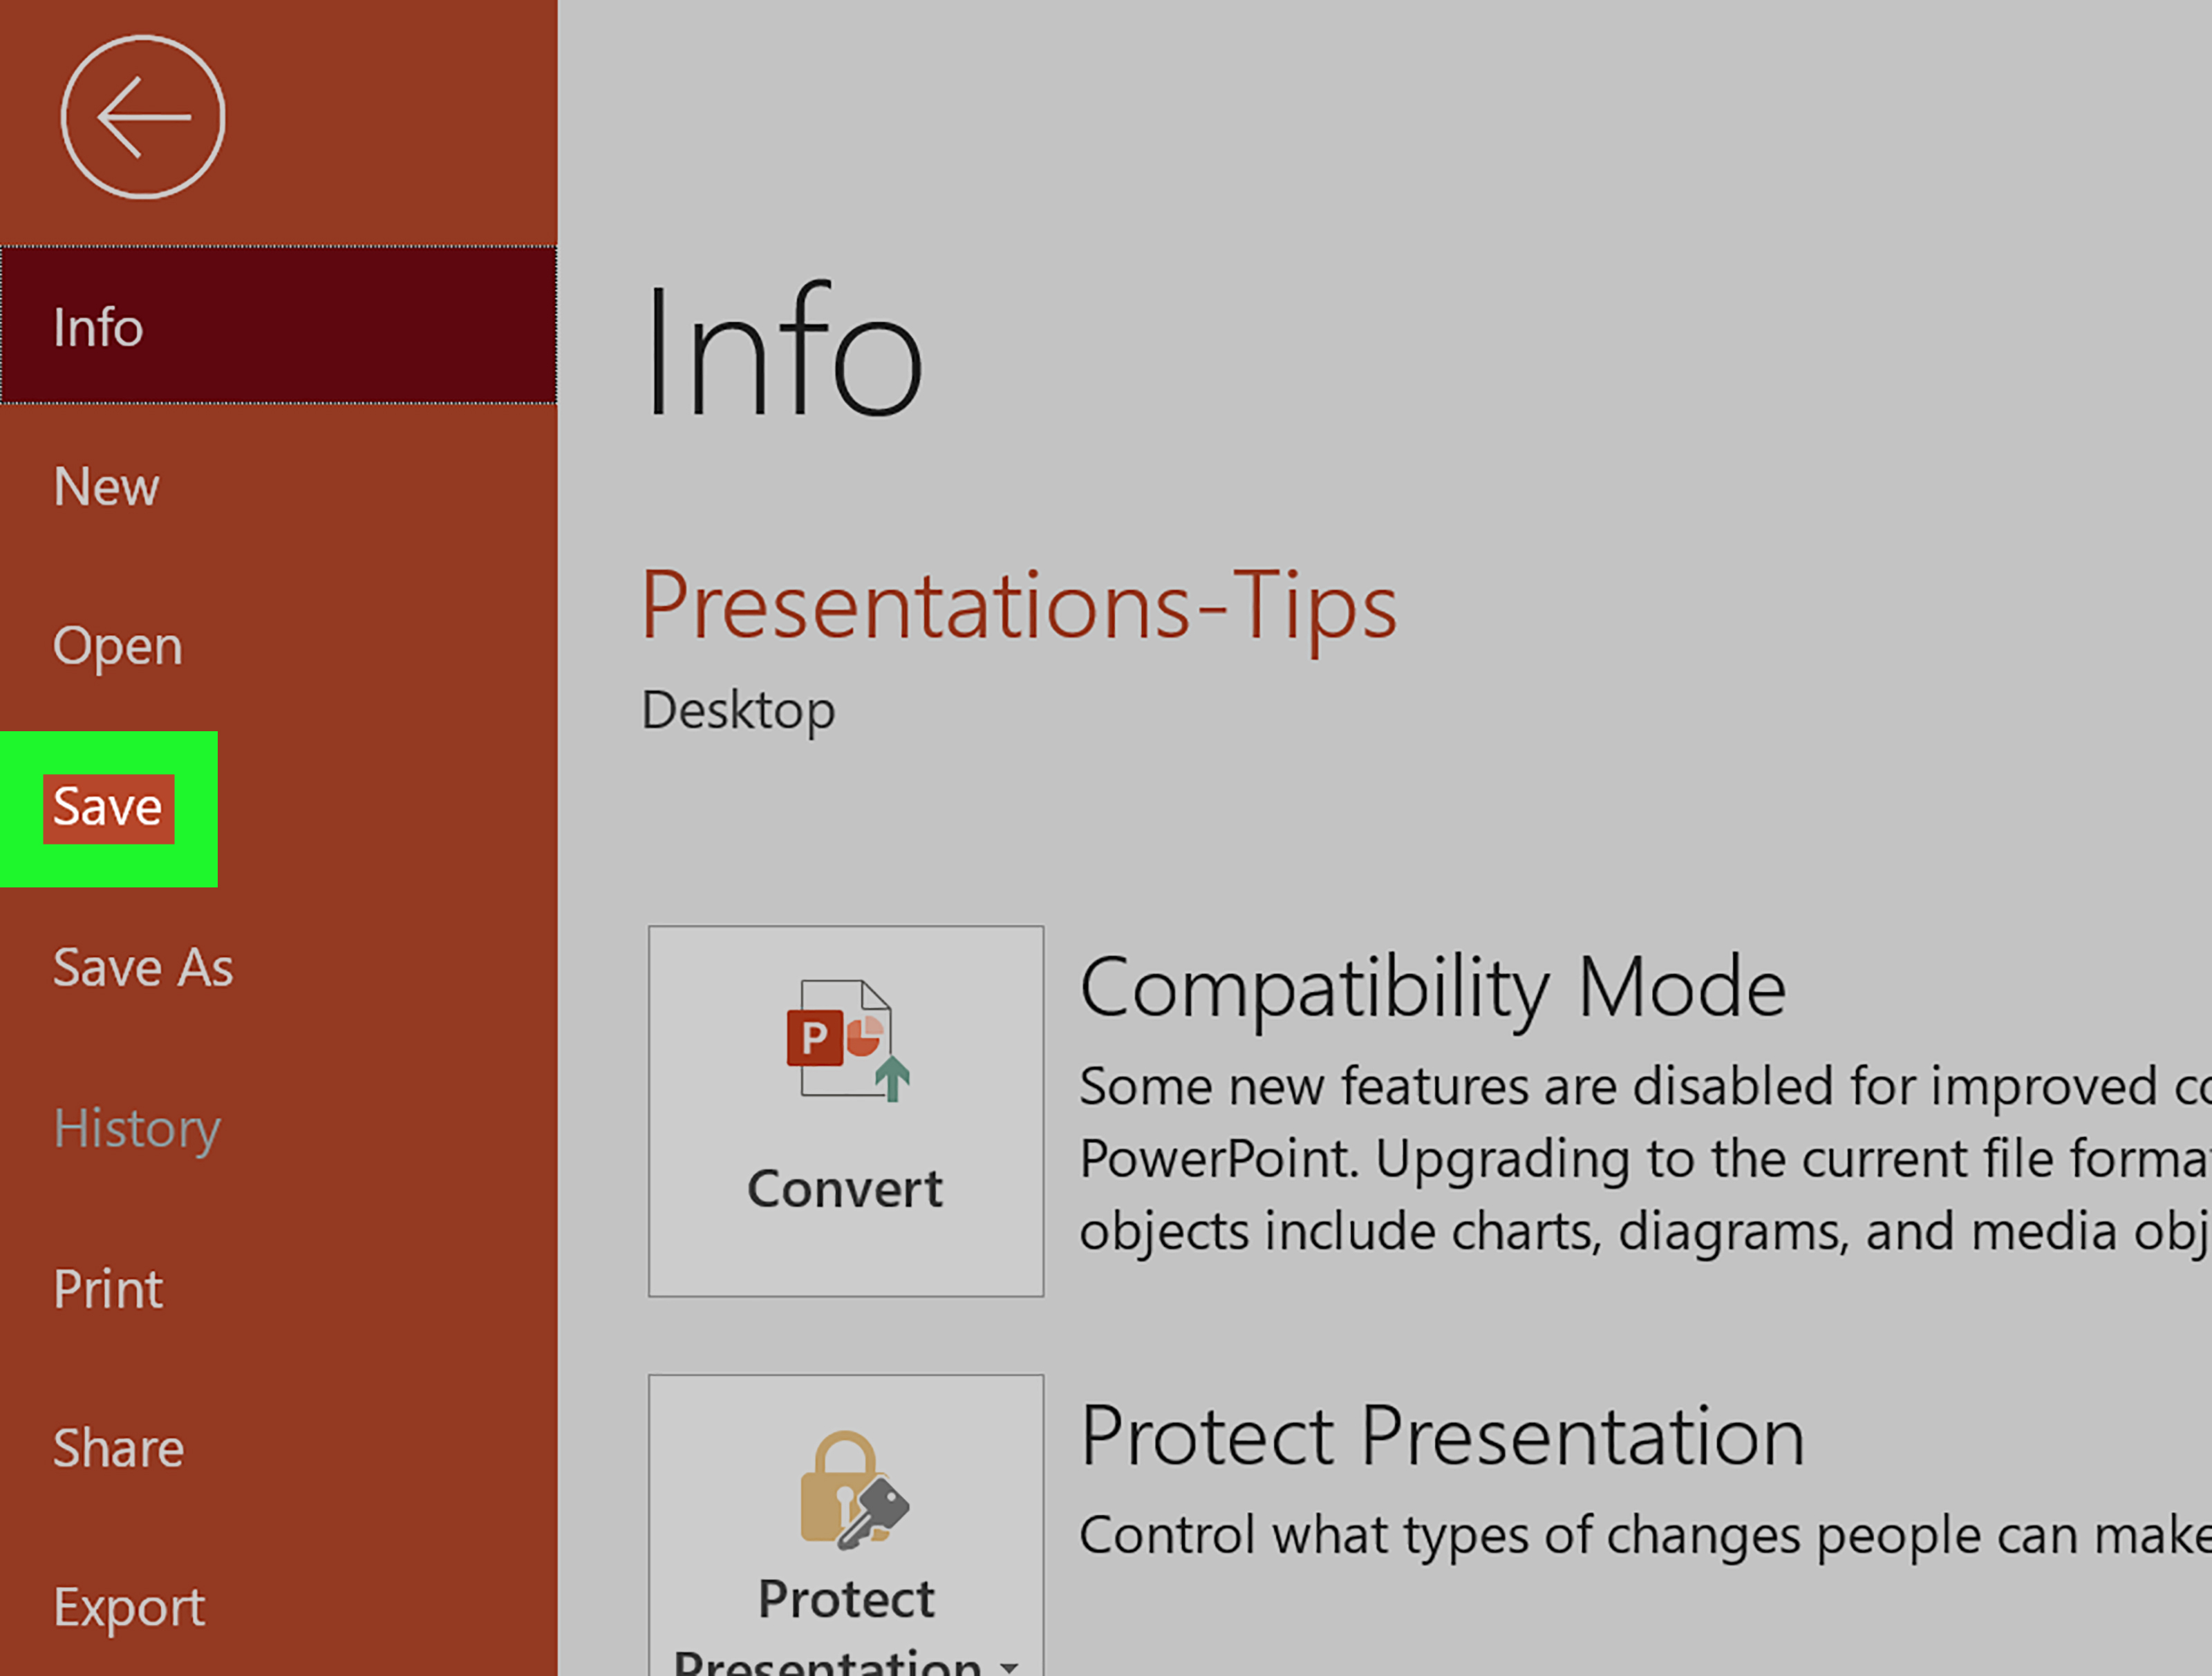 How To Edit A Powerpoint Template: 6 Steps (With Pictures) Pertaining To How To Edit A Powerpoint Template